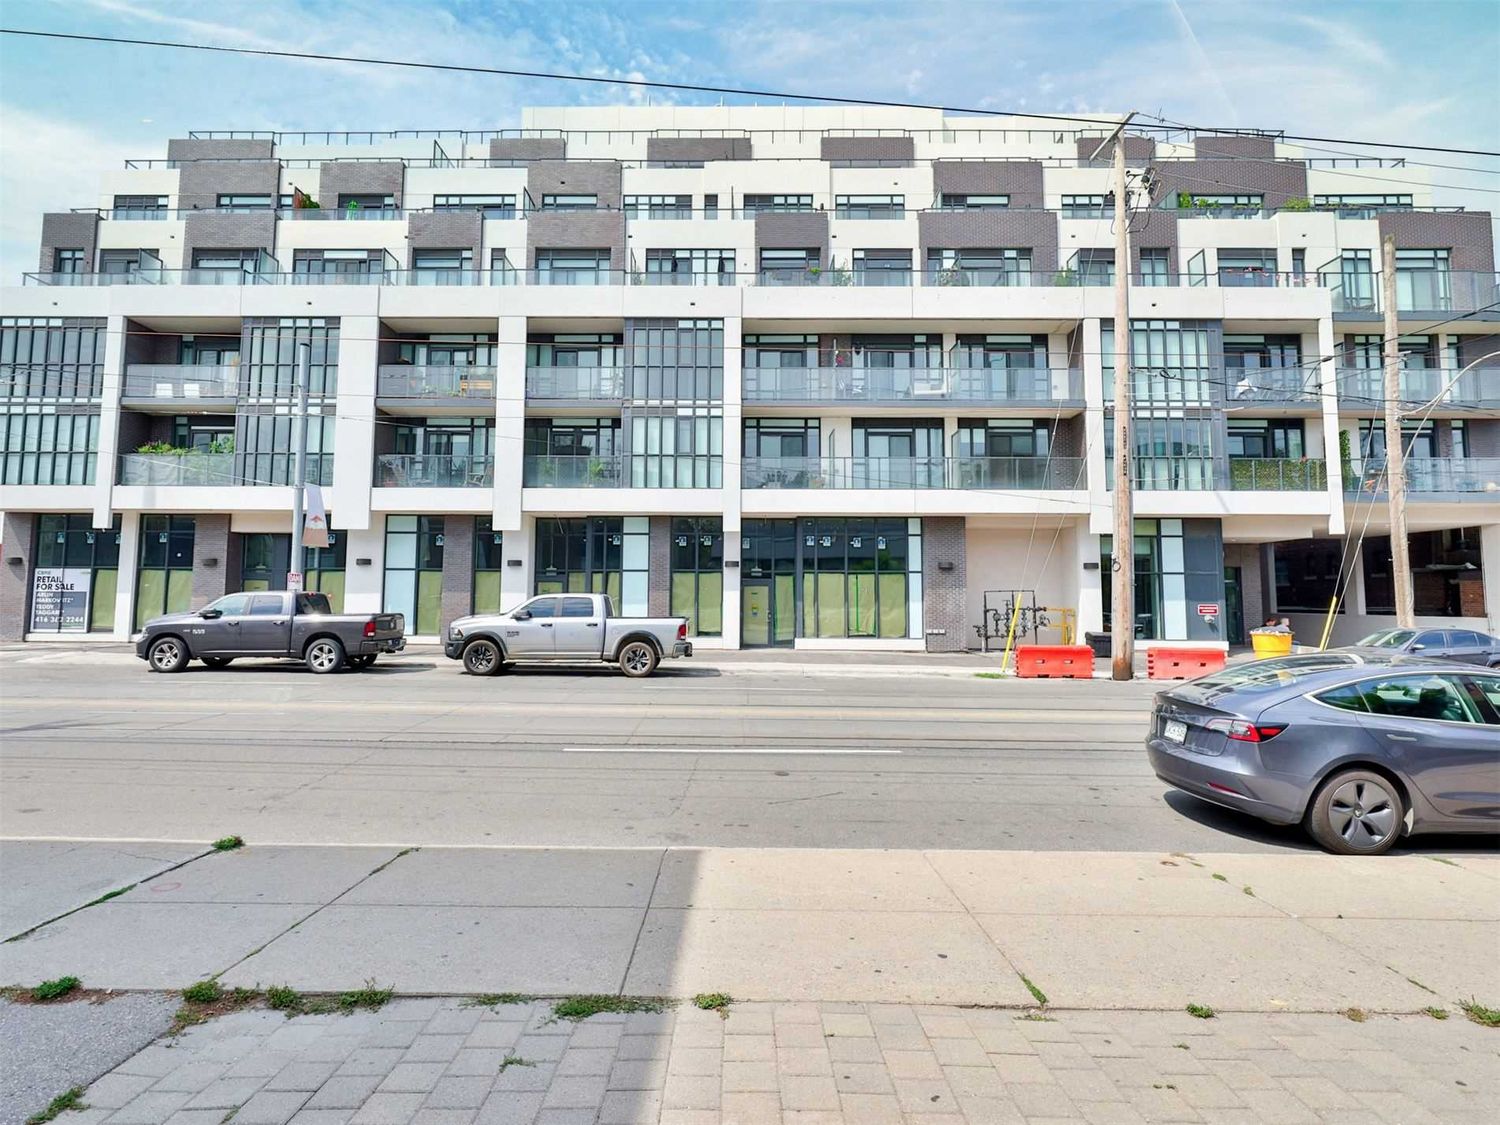 1630 Queen Street E. WestBeach Condos is located in  East End, Toronto - image #1 of 4